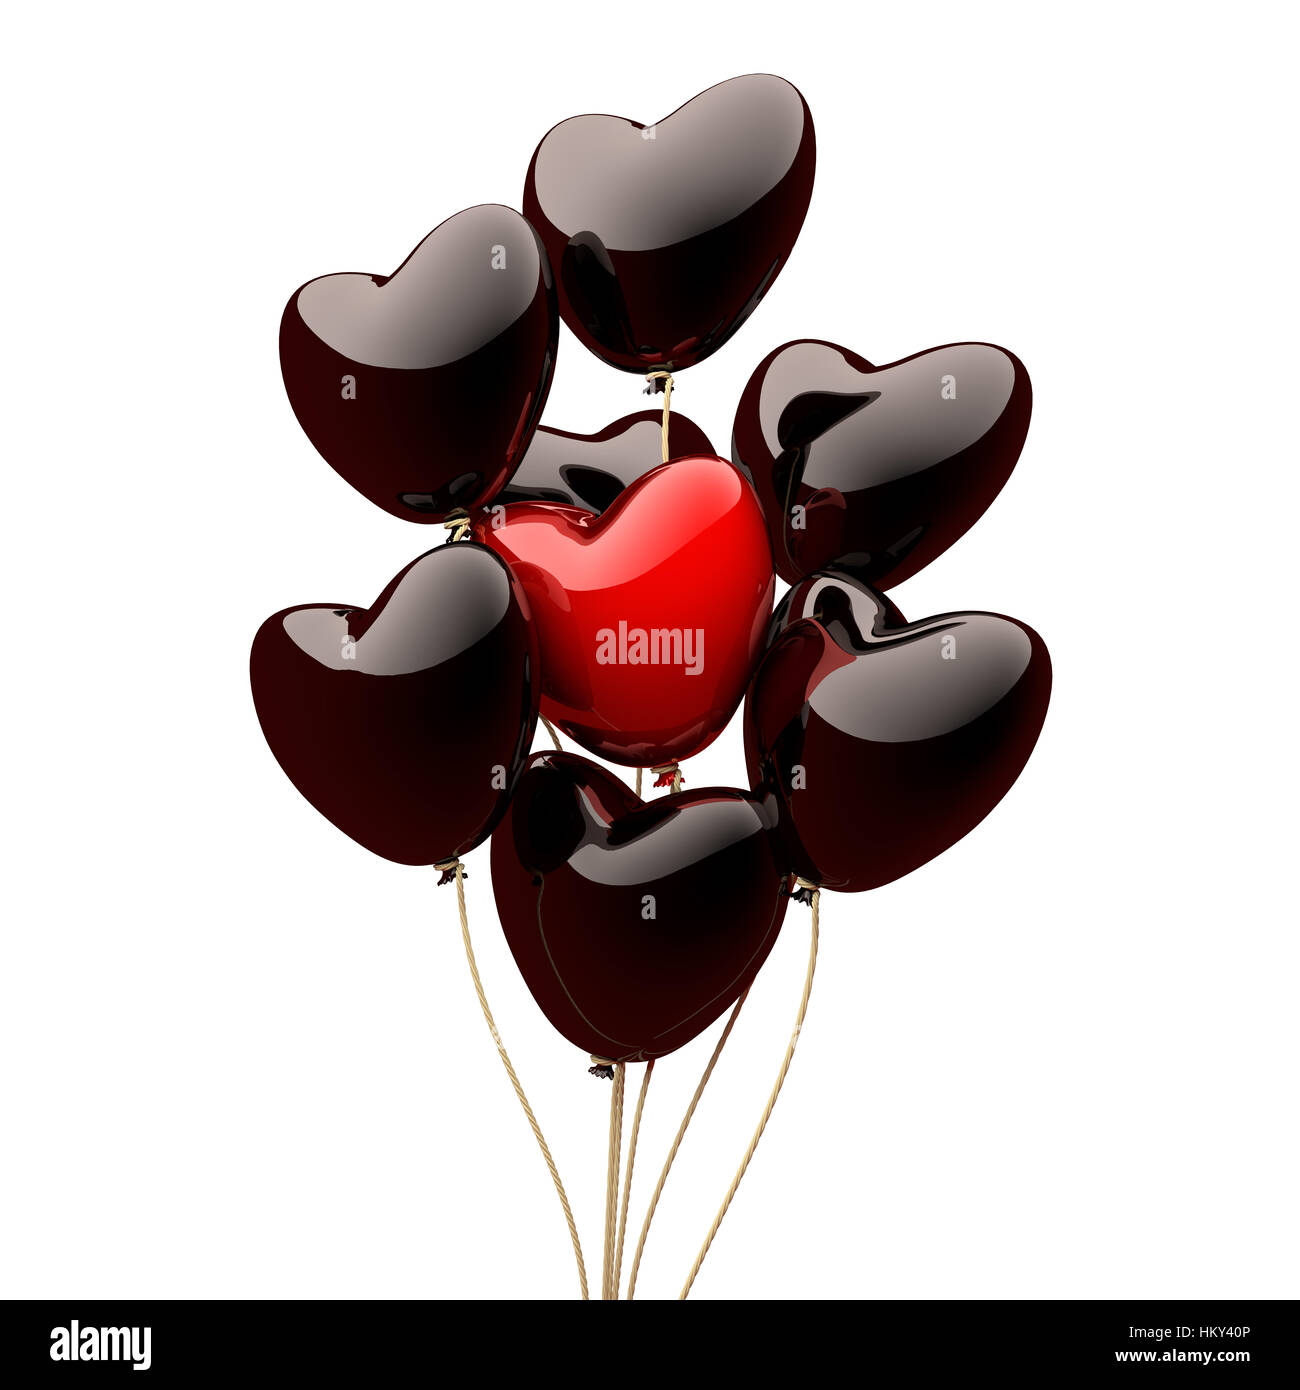 Black heart balloons isolated on the white background. 3D render image. Stock Photo